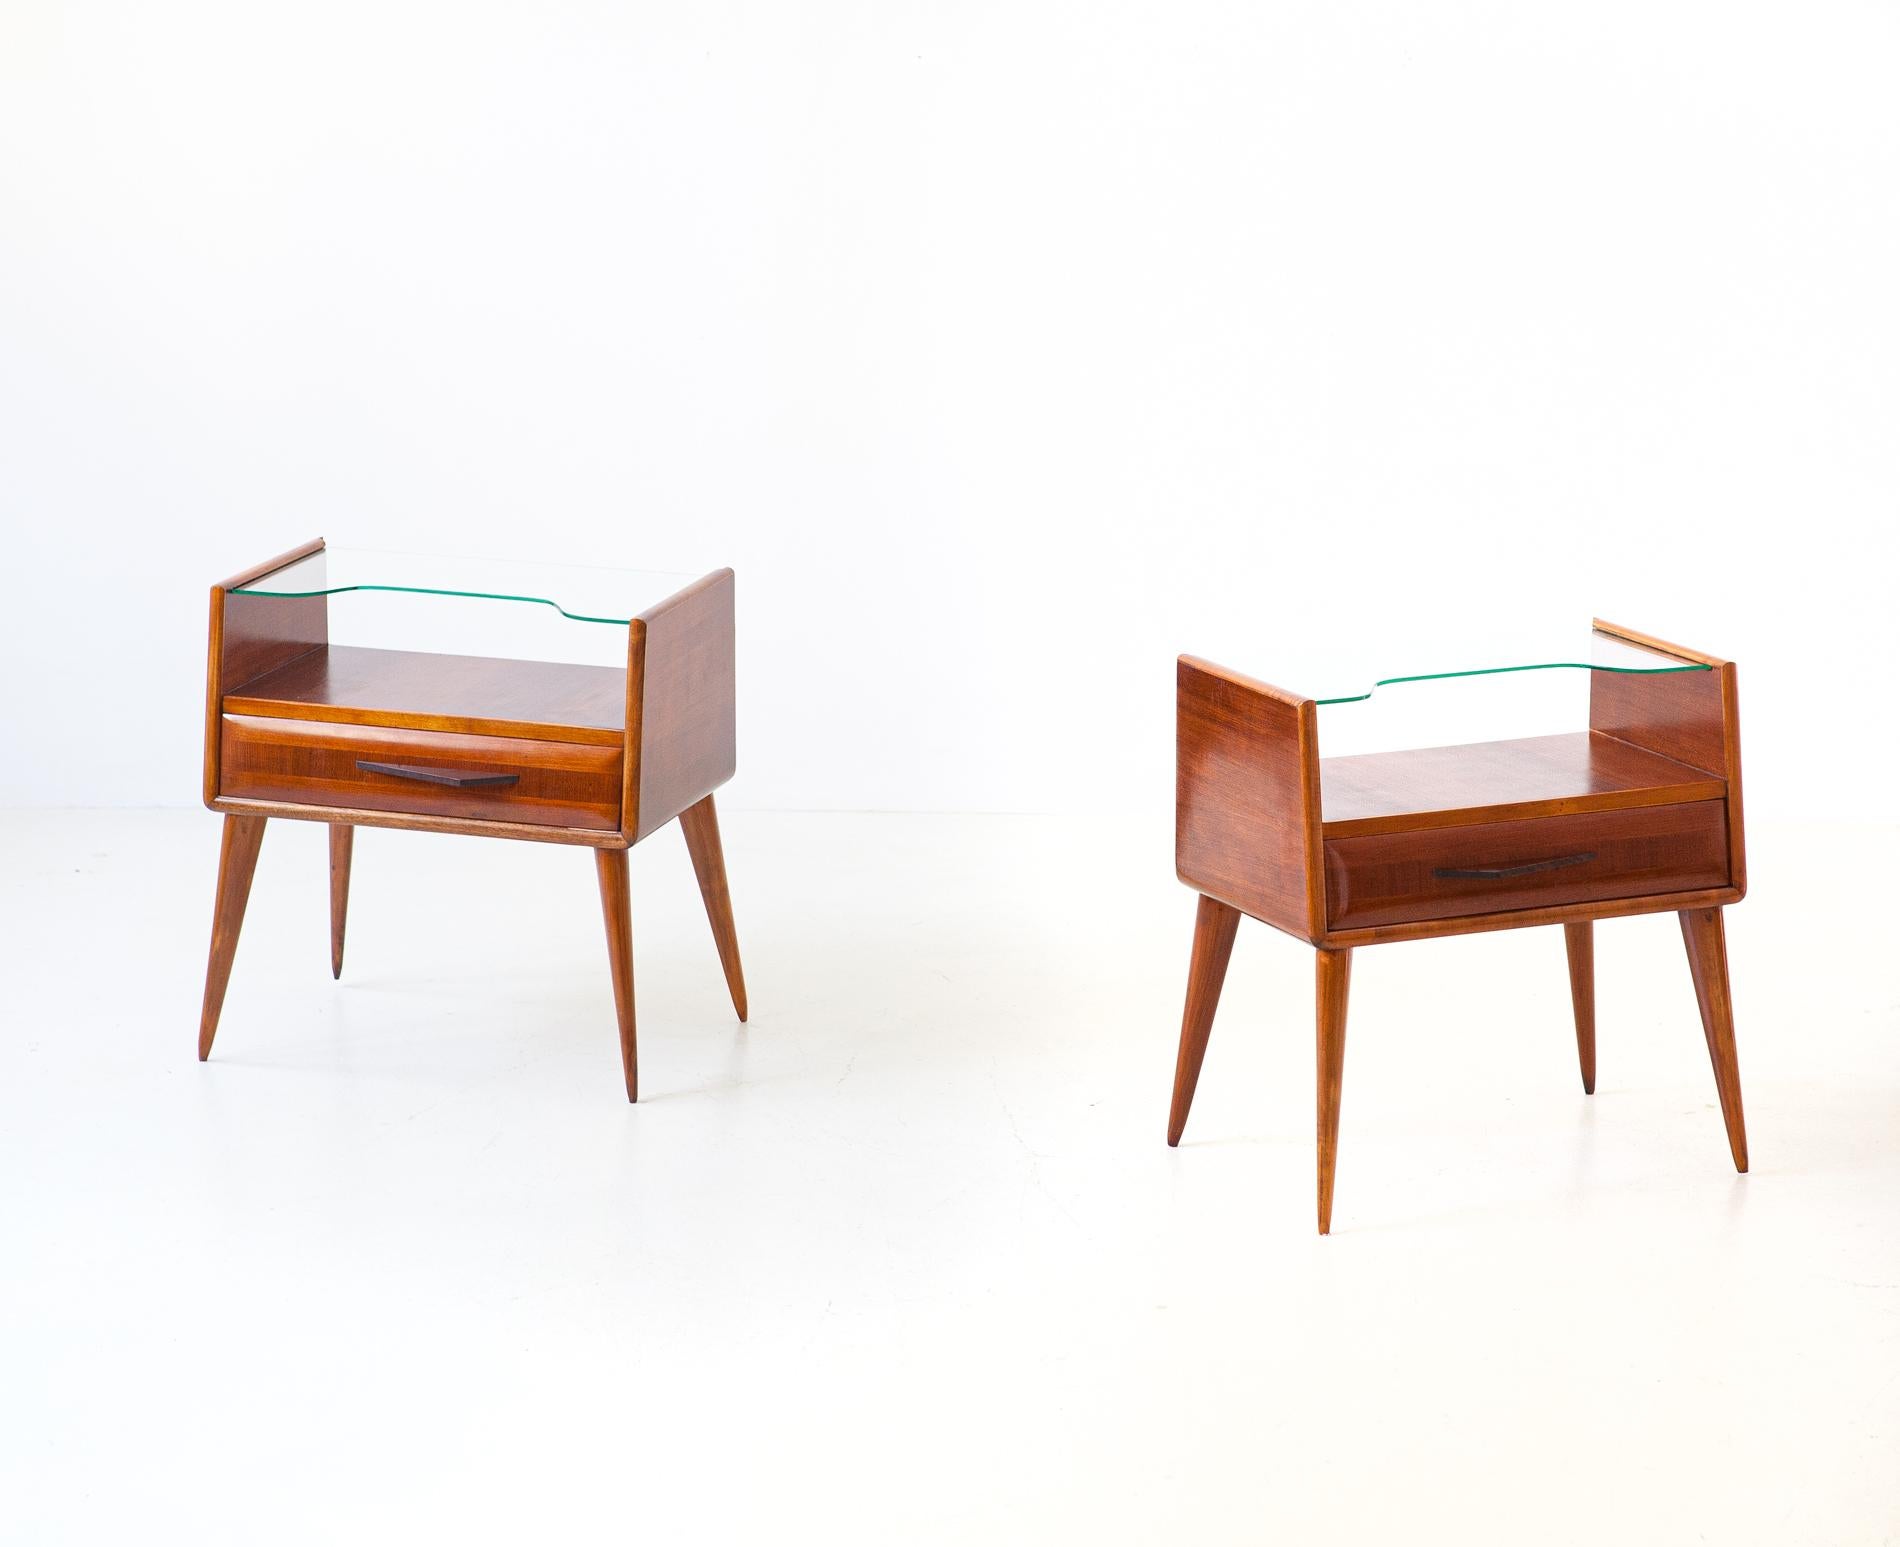 Mid-20th Century 1950s Italian Wooden Bedside Tables with Glass Top